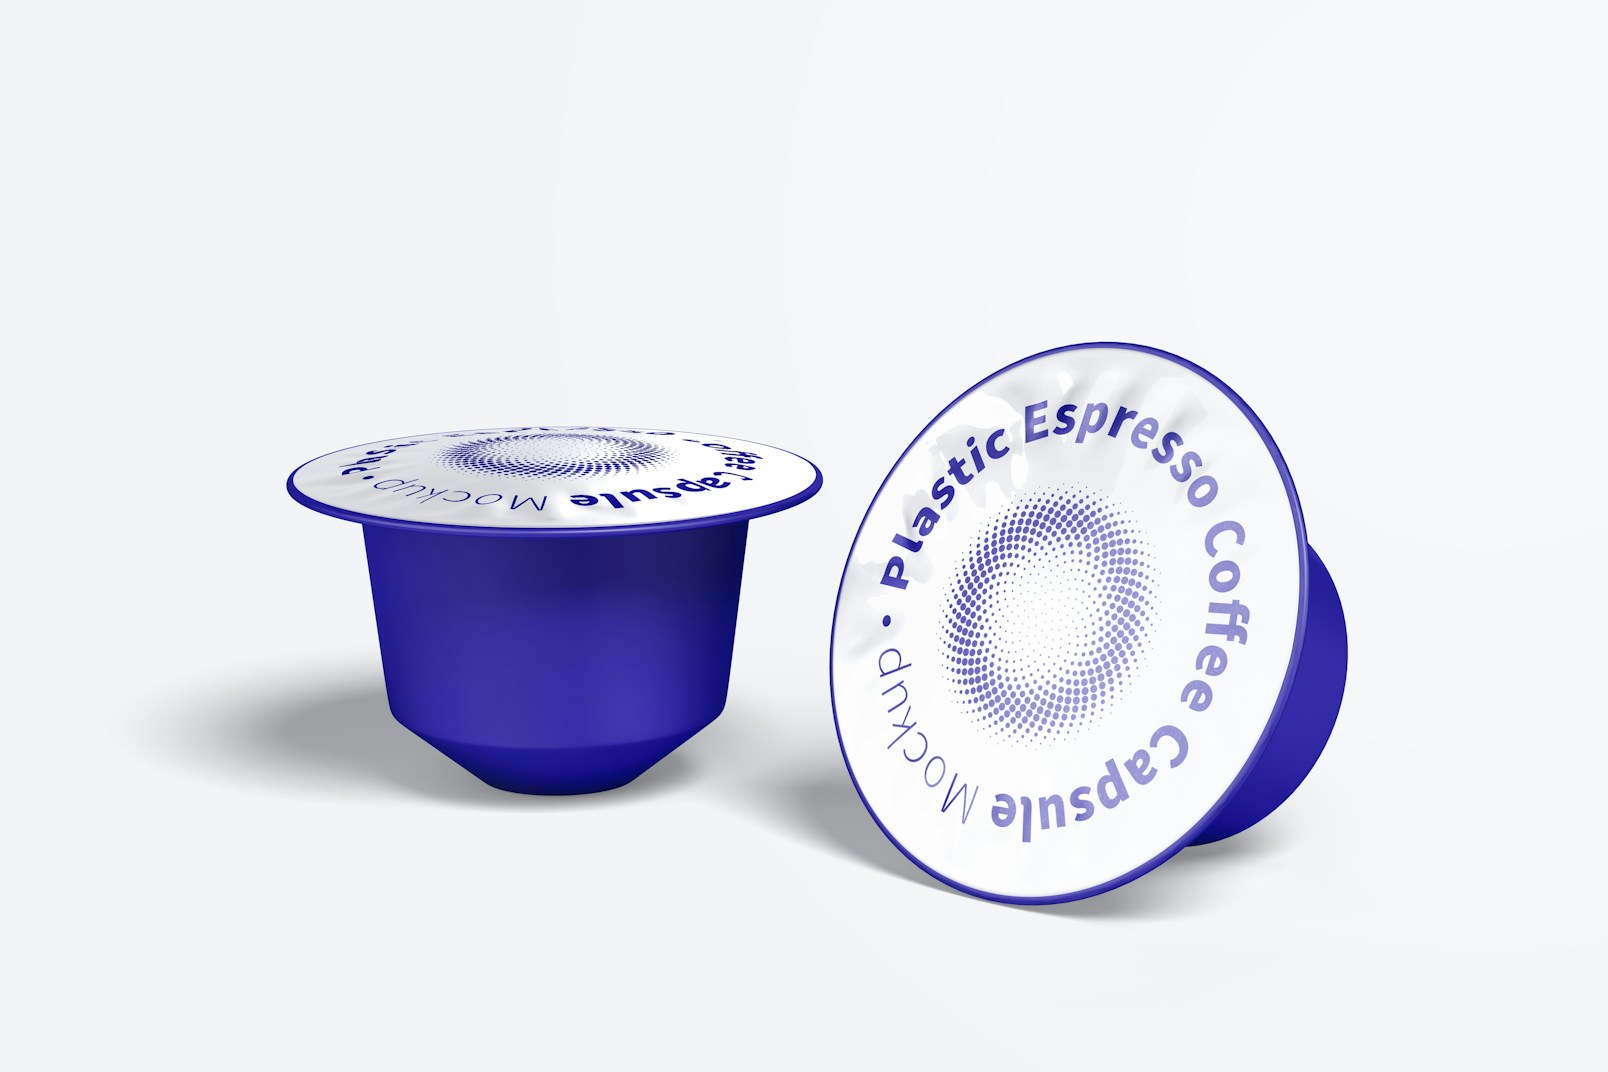 Plastic Espresso Coffee Capsules Mockup, Standing and Dropped